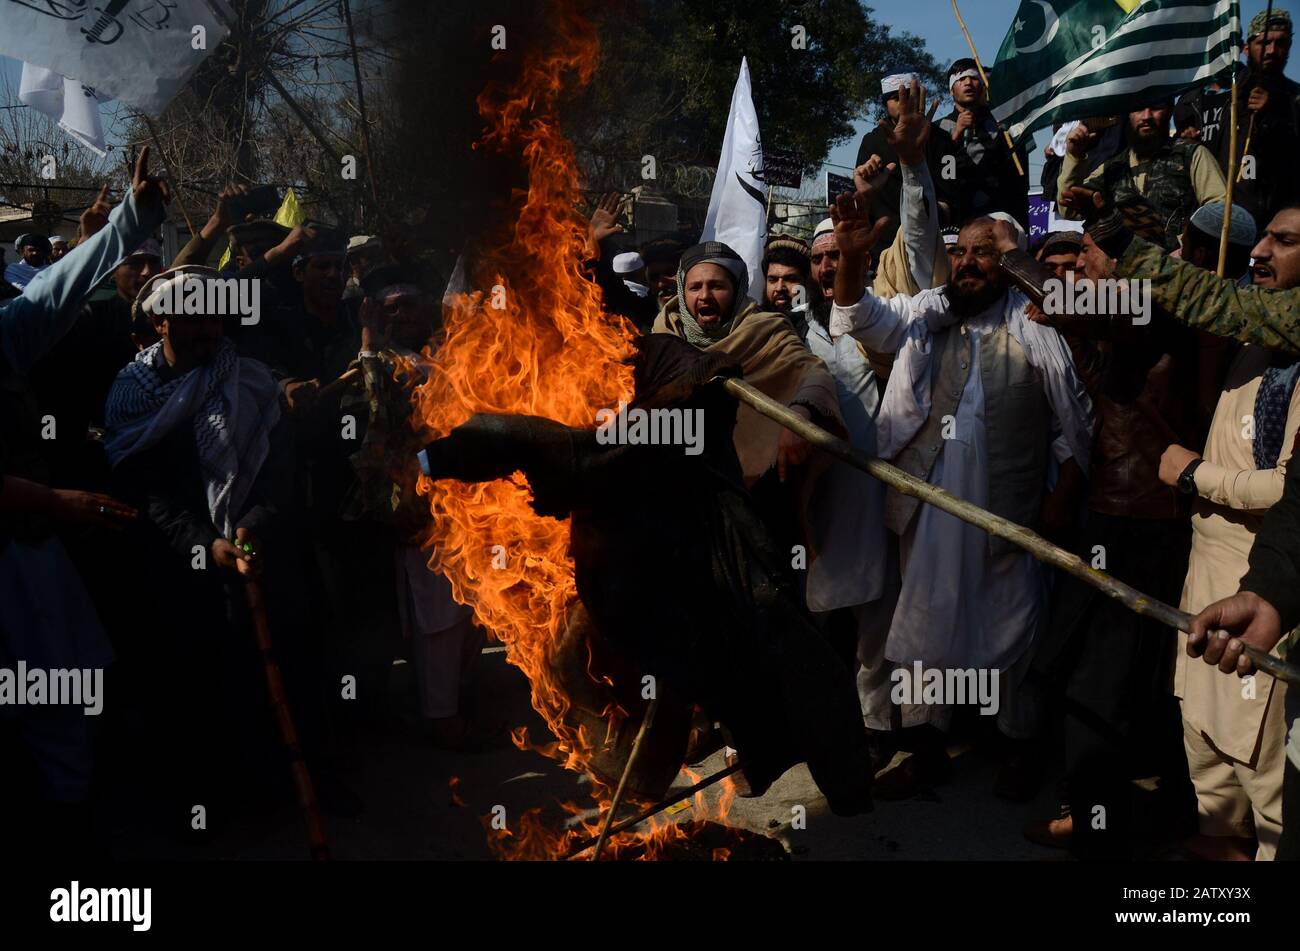 February 5, 2020: Peshawar, Pakistan. 05 February 2020. Pakistanis stage a protest to mark Kashmir Solidarity Day, in the Pakistani city of Peshawar. Participants waved banners and chanted slogans in support of India administered Kashmir and Kasmiris' struggle for their right to self-determination. The Indian flag and an effigy of Indian President Narendra Modi were set alight during the protest on Wednesday. Children also joined the rally waving Pakistan and the Azad Jammu and Kashmir flag in solidarity with the Kashmiris. The Indian State of Jammu and Kashmir has been under severe restrict Stock Photo